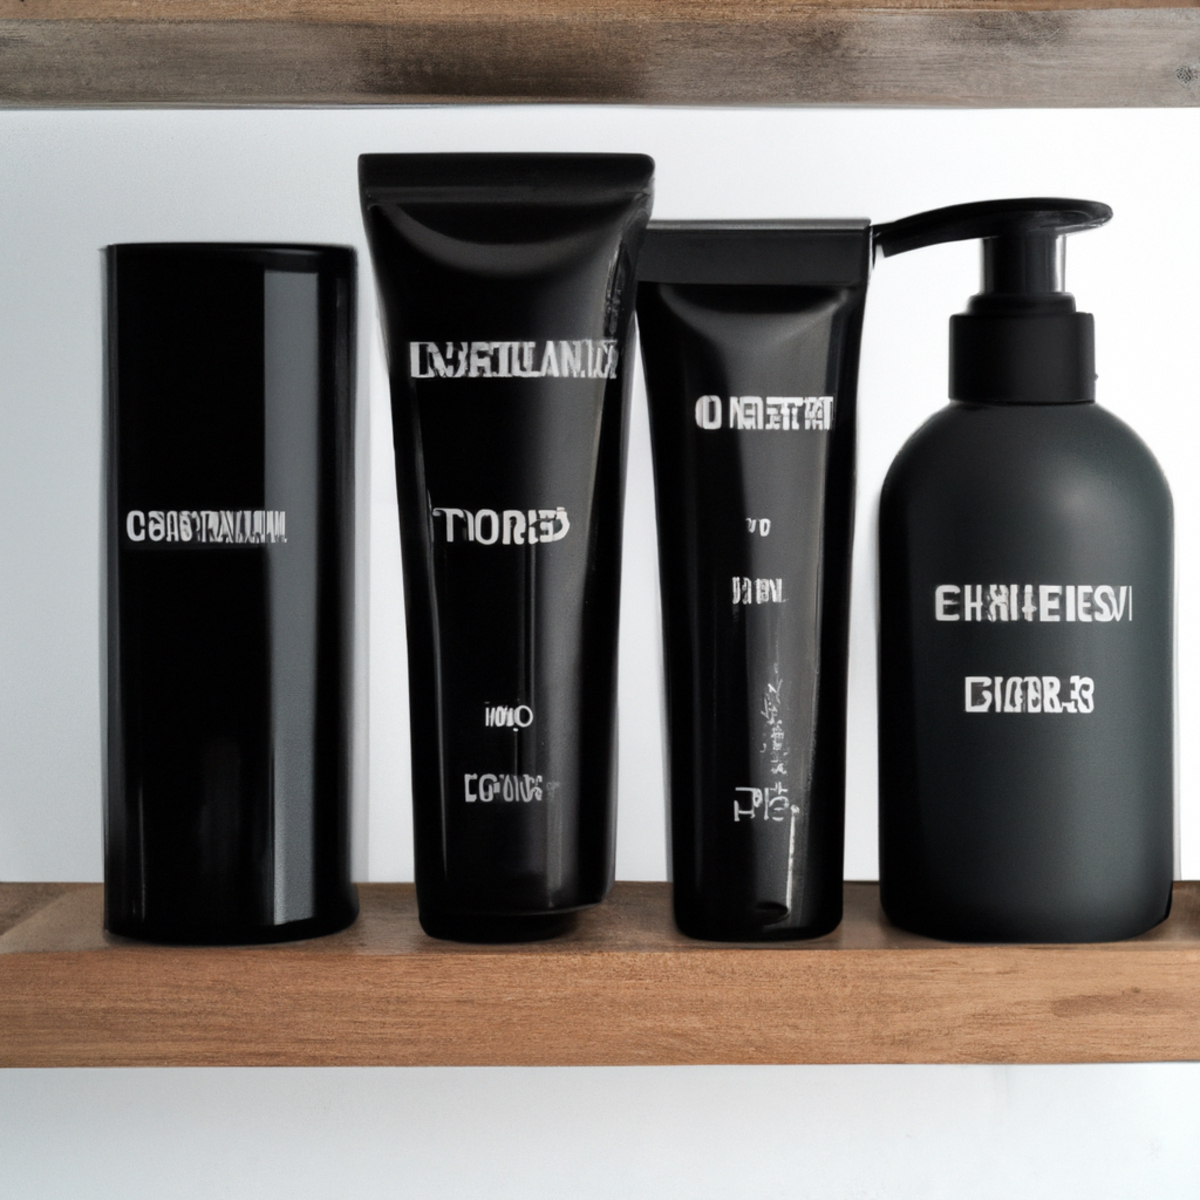 Hair care routine for men - A wooden shelf with men's hair care products, including shampoo, wax, conditioner, brush, and serum.